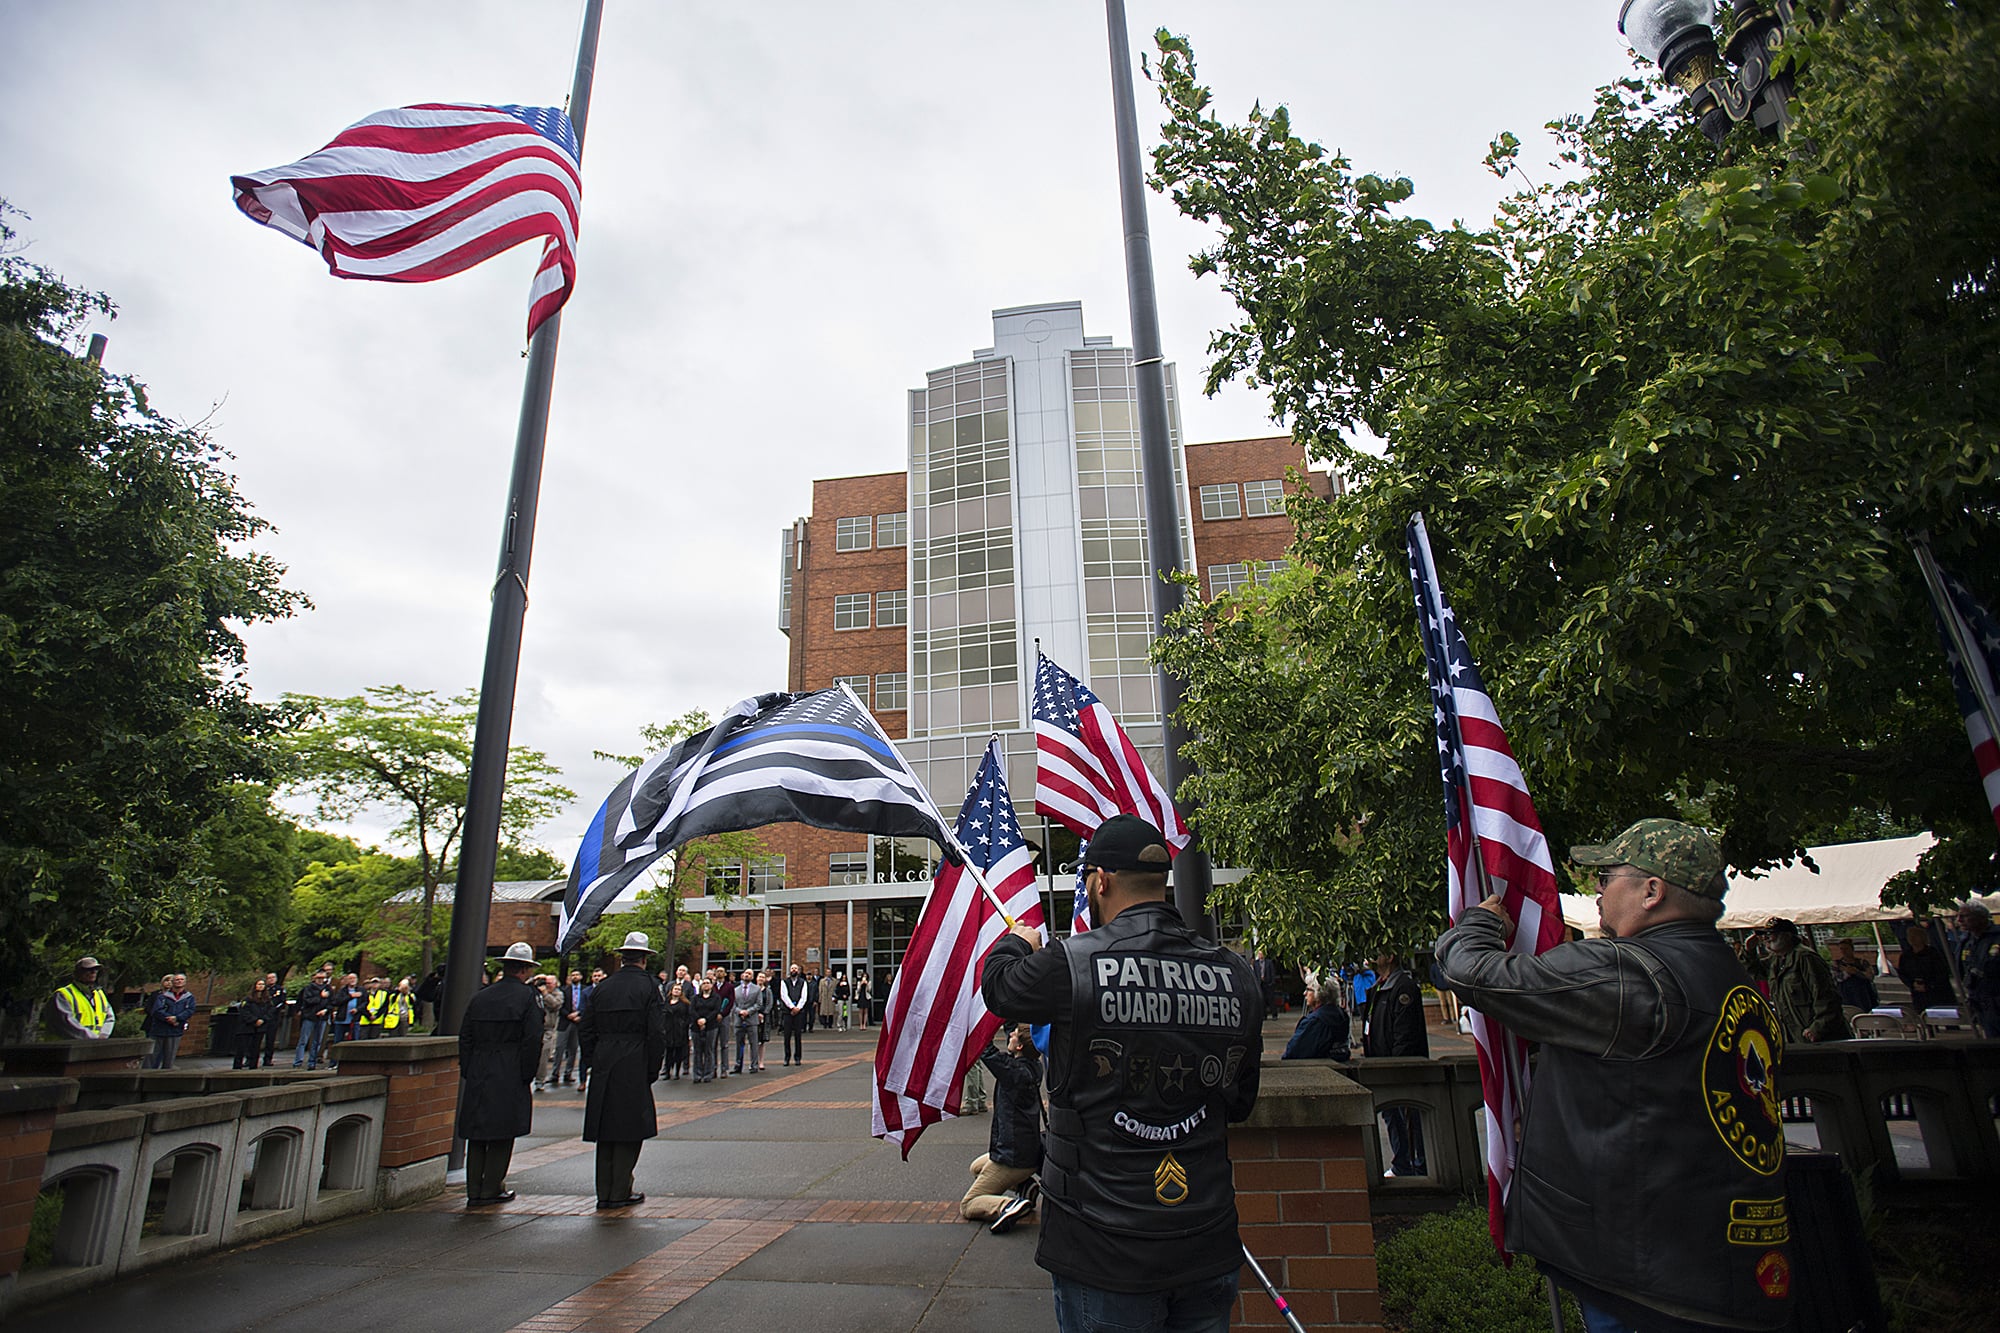 Members of the Patriot Guard Riders show their patriotic spirit as the flag is raised during the Clark County Law Enforcement Memorial outside the Clark County Public Service Center on Thursday morning, May 16, 2019. The ceremony honors fallen heroes who were killed in the line of duty.